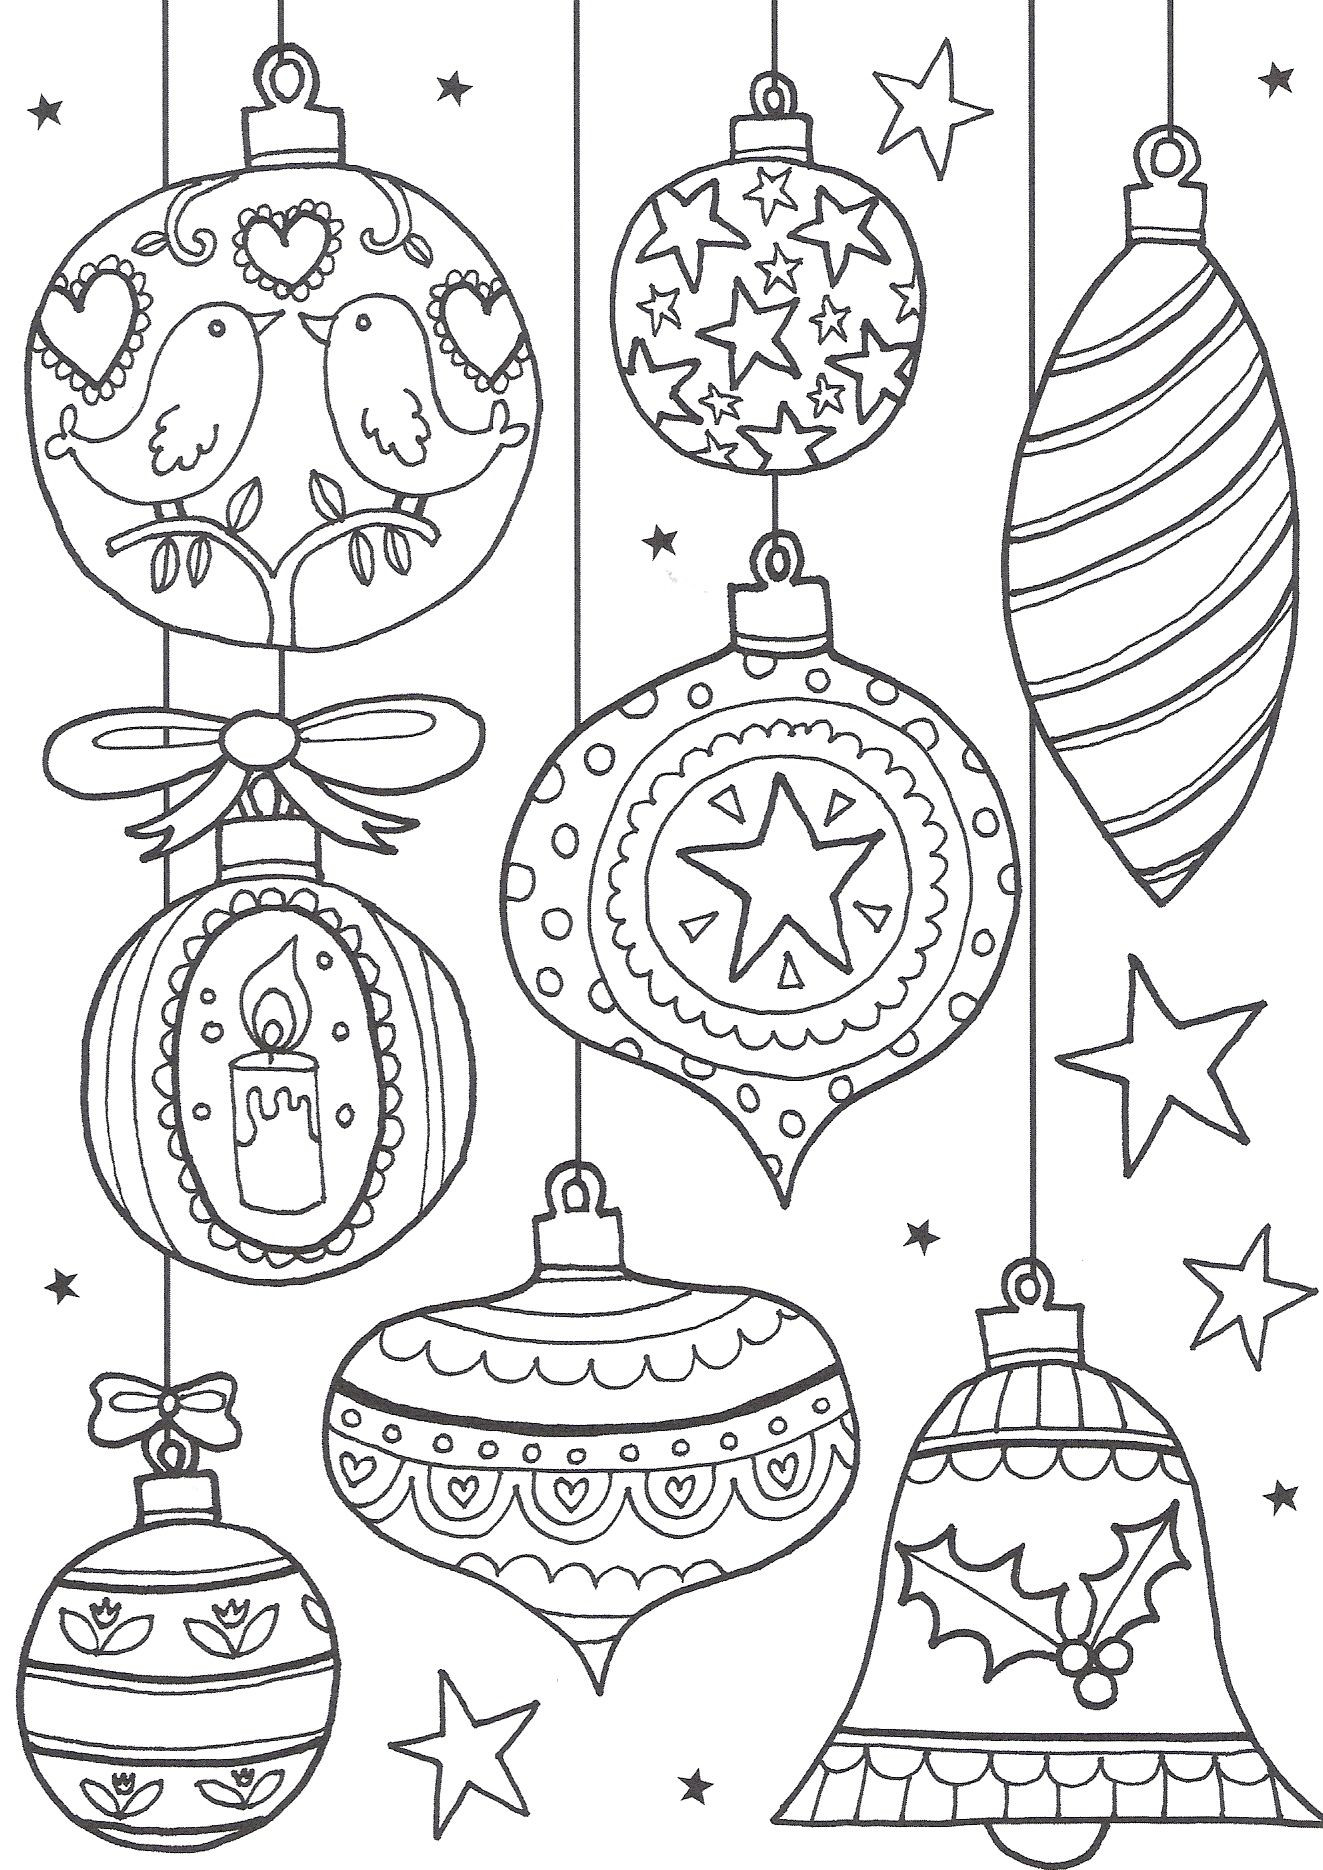 Free Printable Christmas Coloring Sheets
 Free Christmas Colouring Pages for Adults The Ultimate